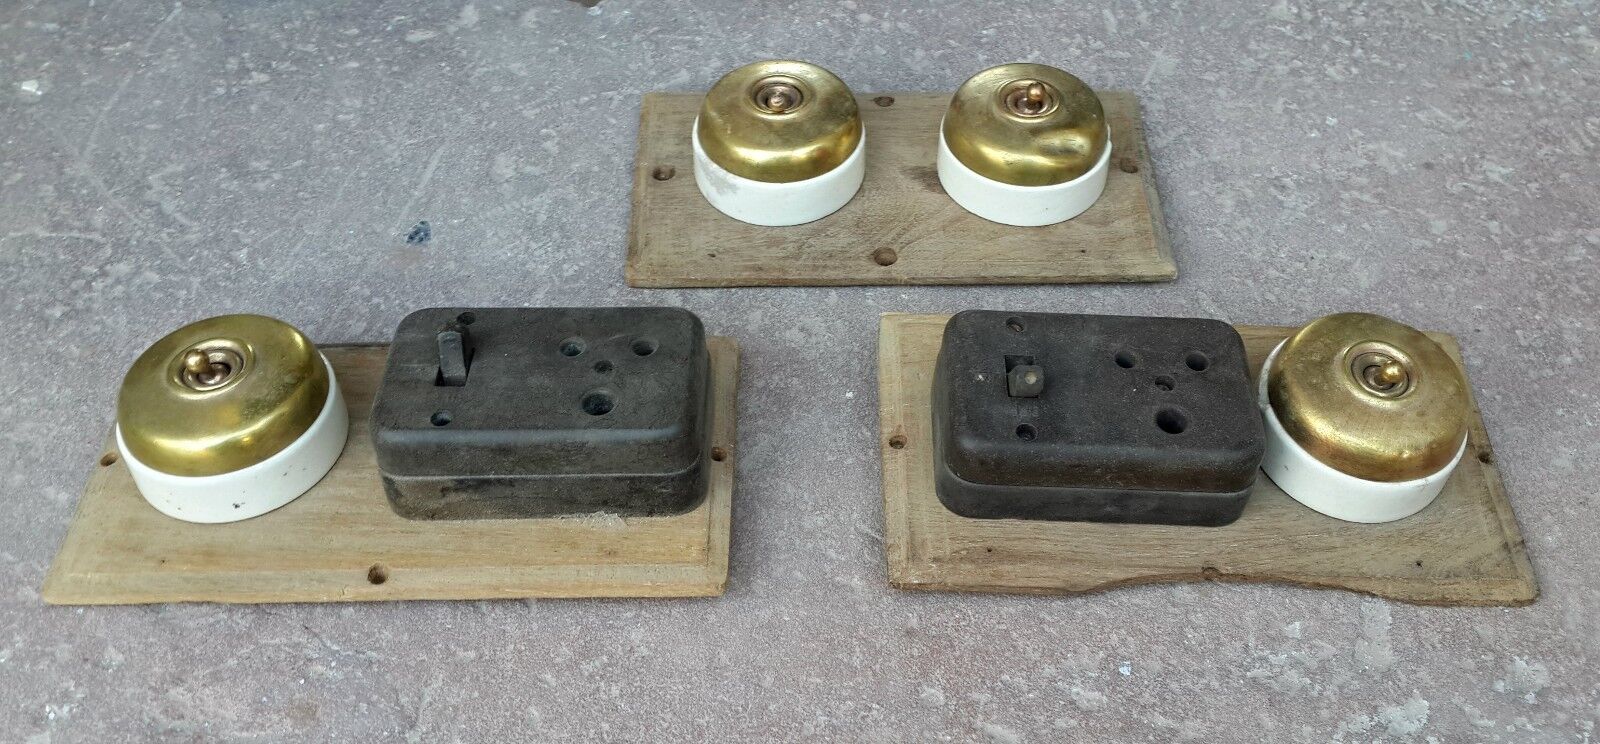 Vintage 4 Pcs Vitreous Brass Ceramic Electric Switches Fitted In Board C127